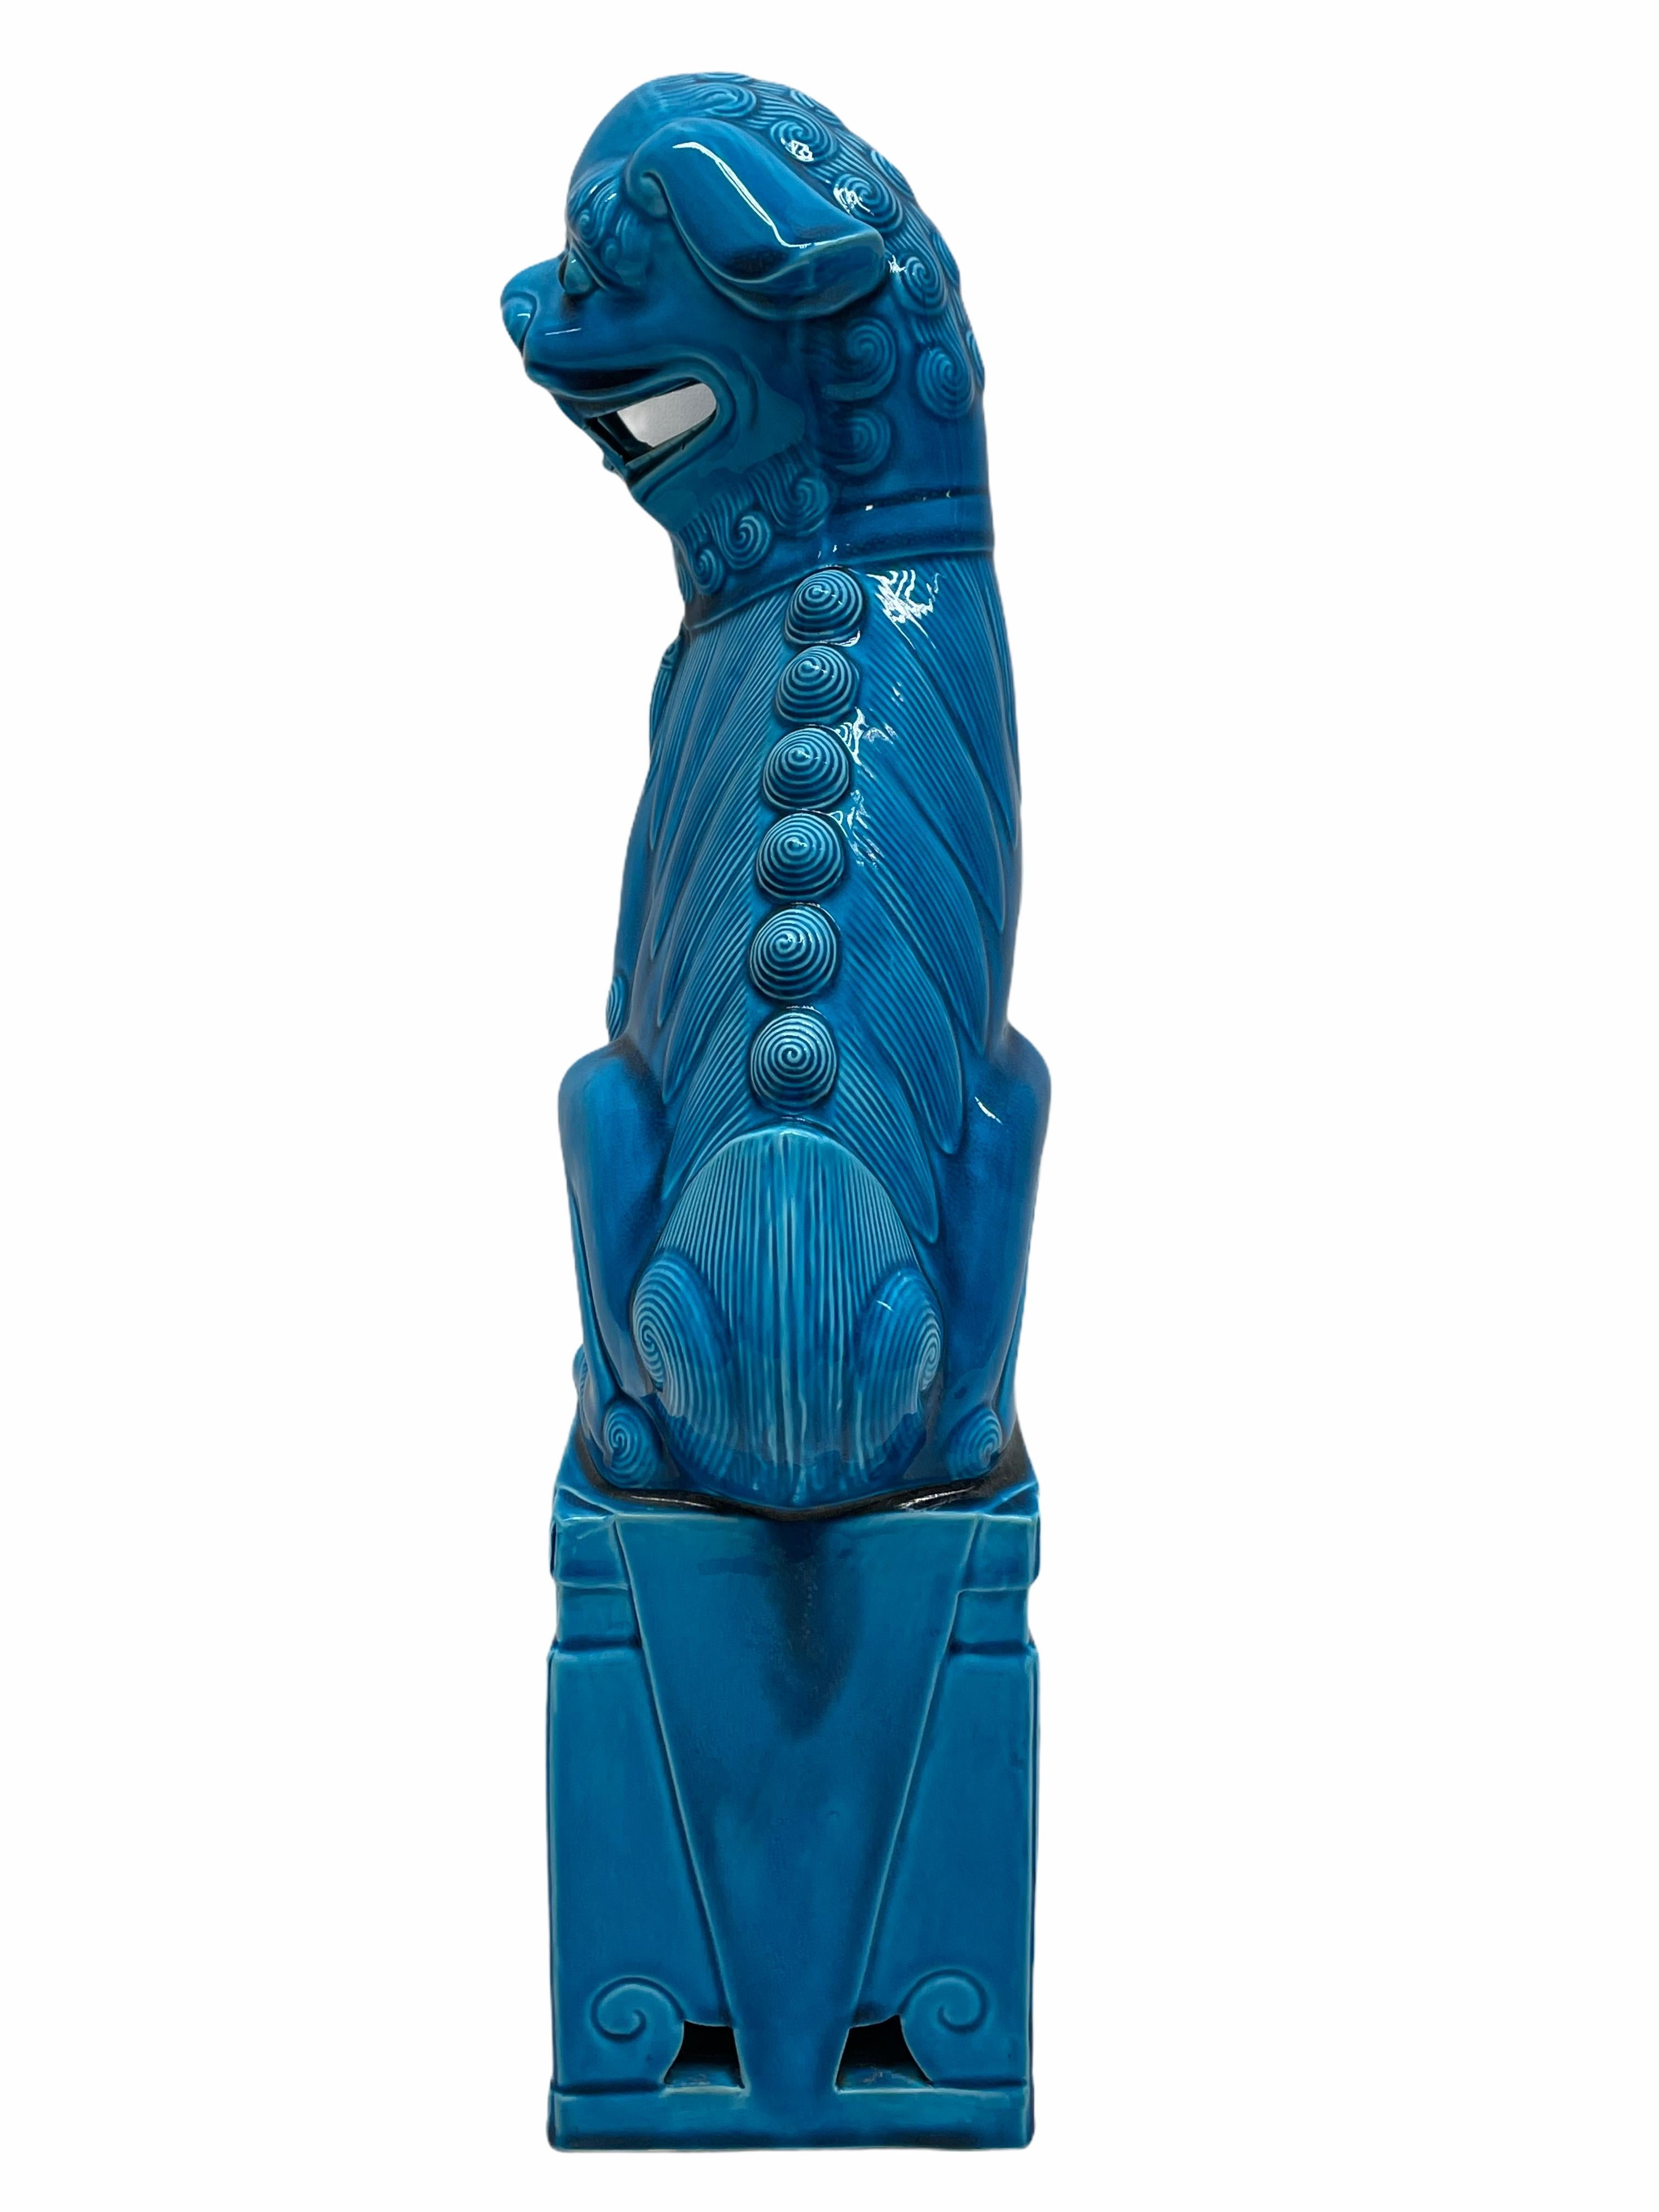 A very nice vintage, large size, turquoise blue, ceramic foo dog sculpture, circa 1960s. Excellent condition and patina; makes a fun decor item in any room!